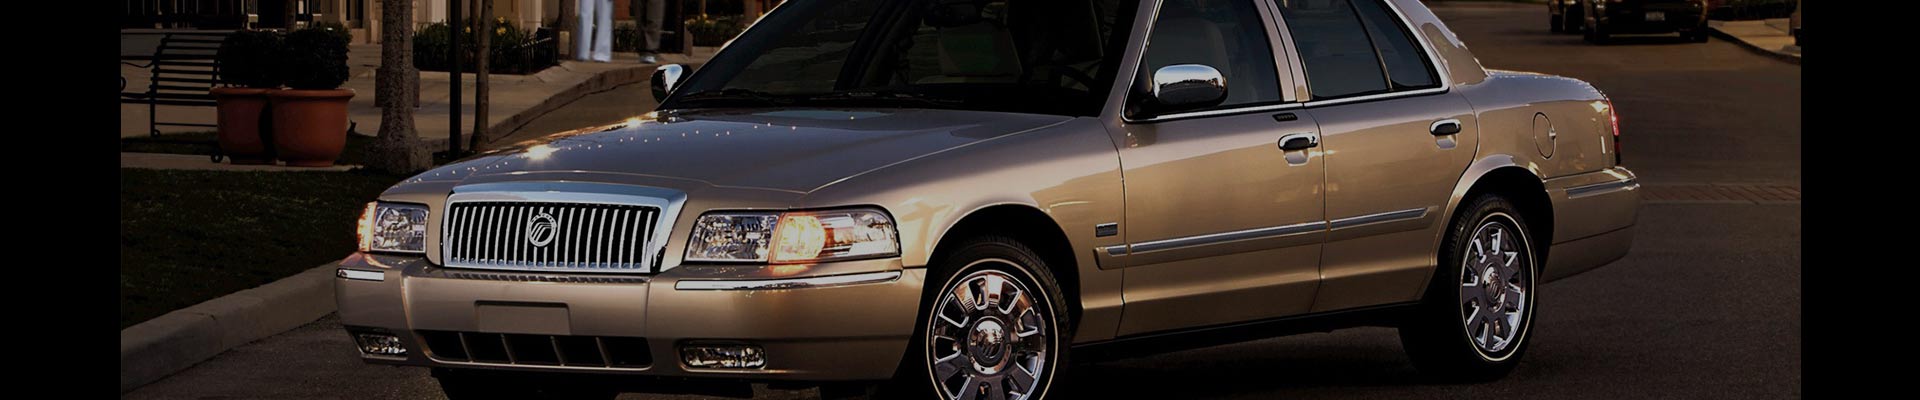 Shop Replacement and OEM 1997 Mercury Grand Marquis Parts with Discounted Price on the Net